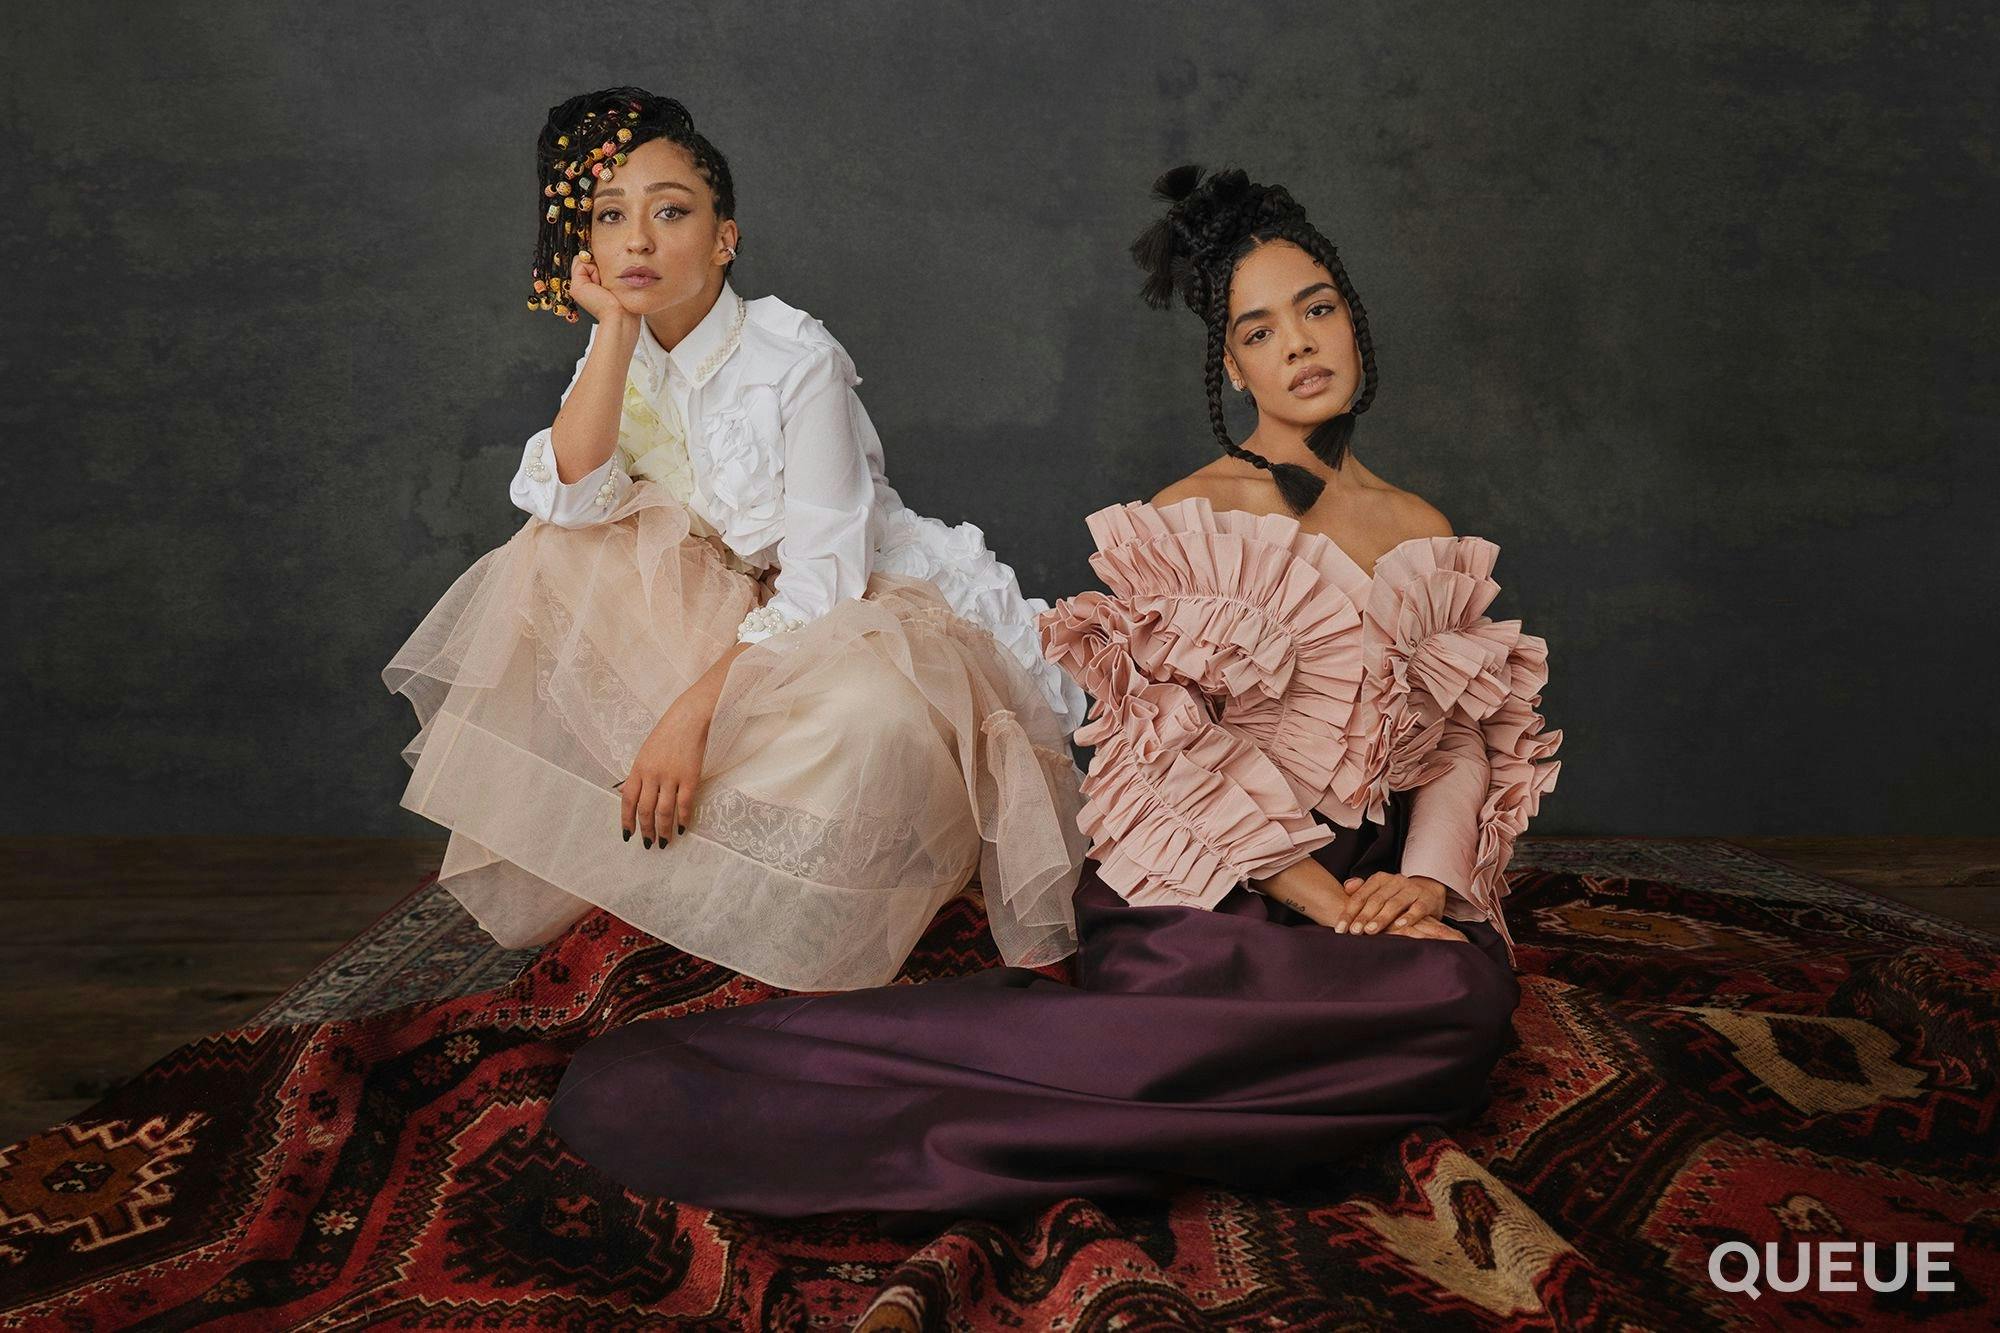 Ruth Negga and Tessa Thompson sit side by side on a pile of colorful rugs.  Ruth wears a peach tulle skirt and a white ruffled shirt.  Tessa wears a long purple skirt and a pale pink ruffled shirt